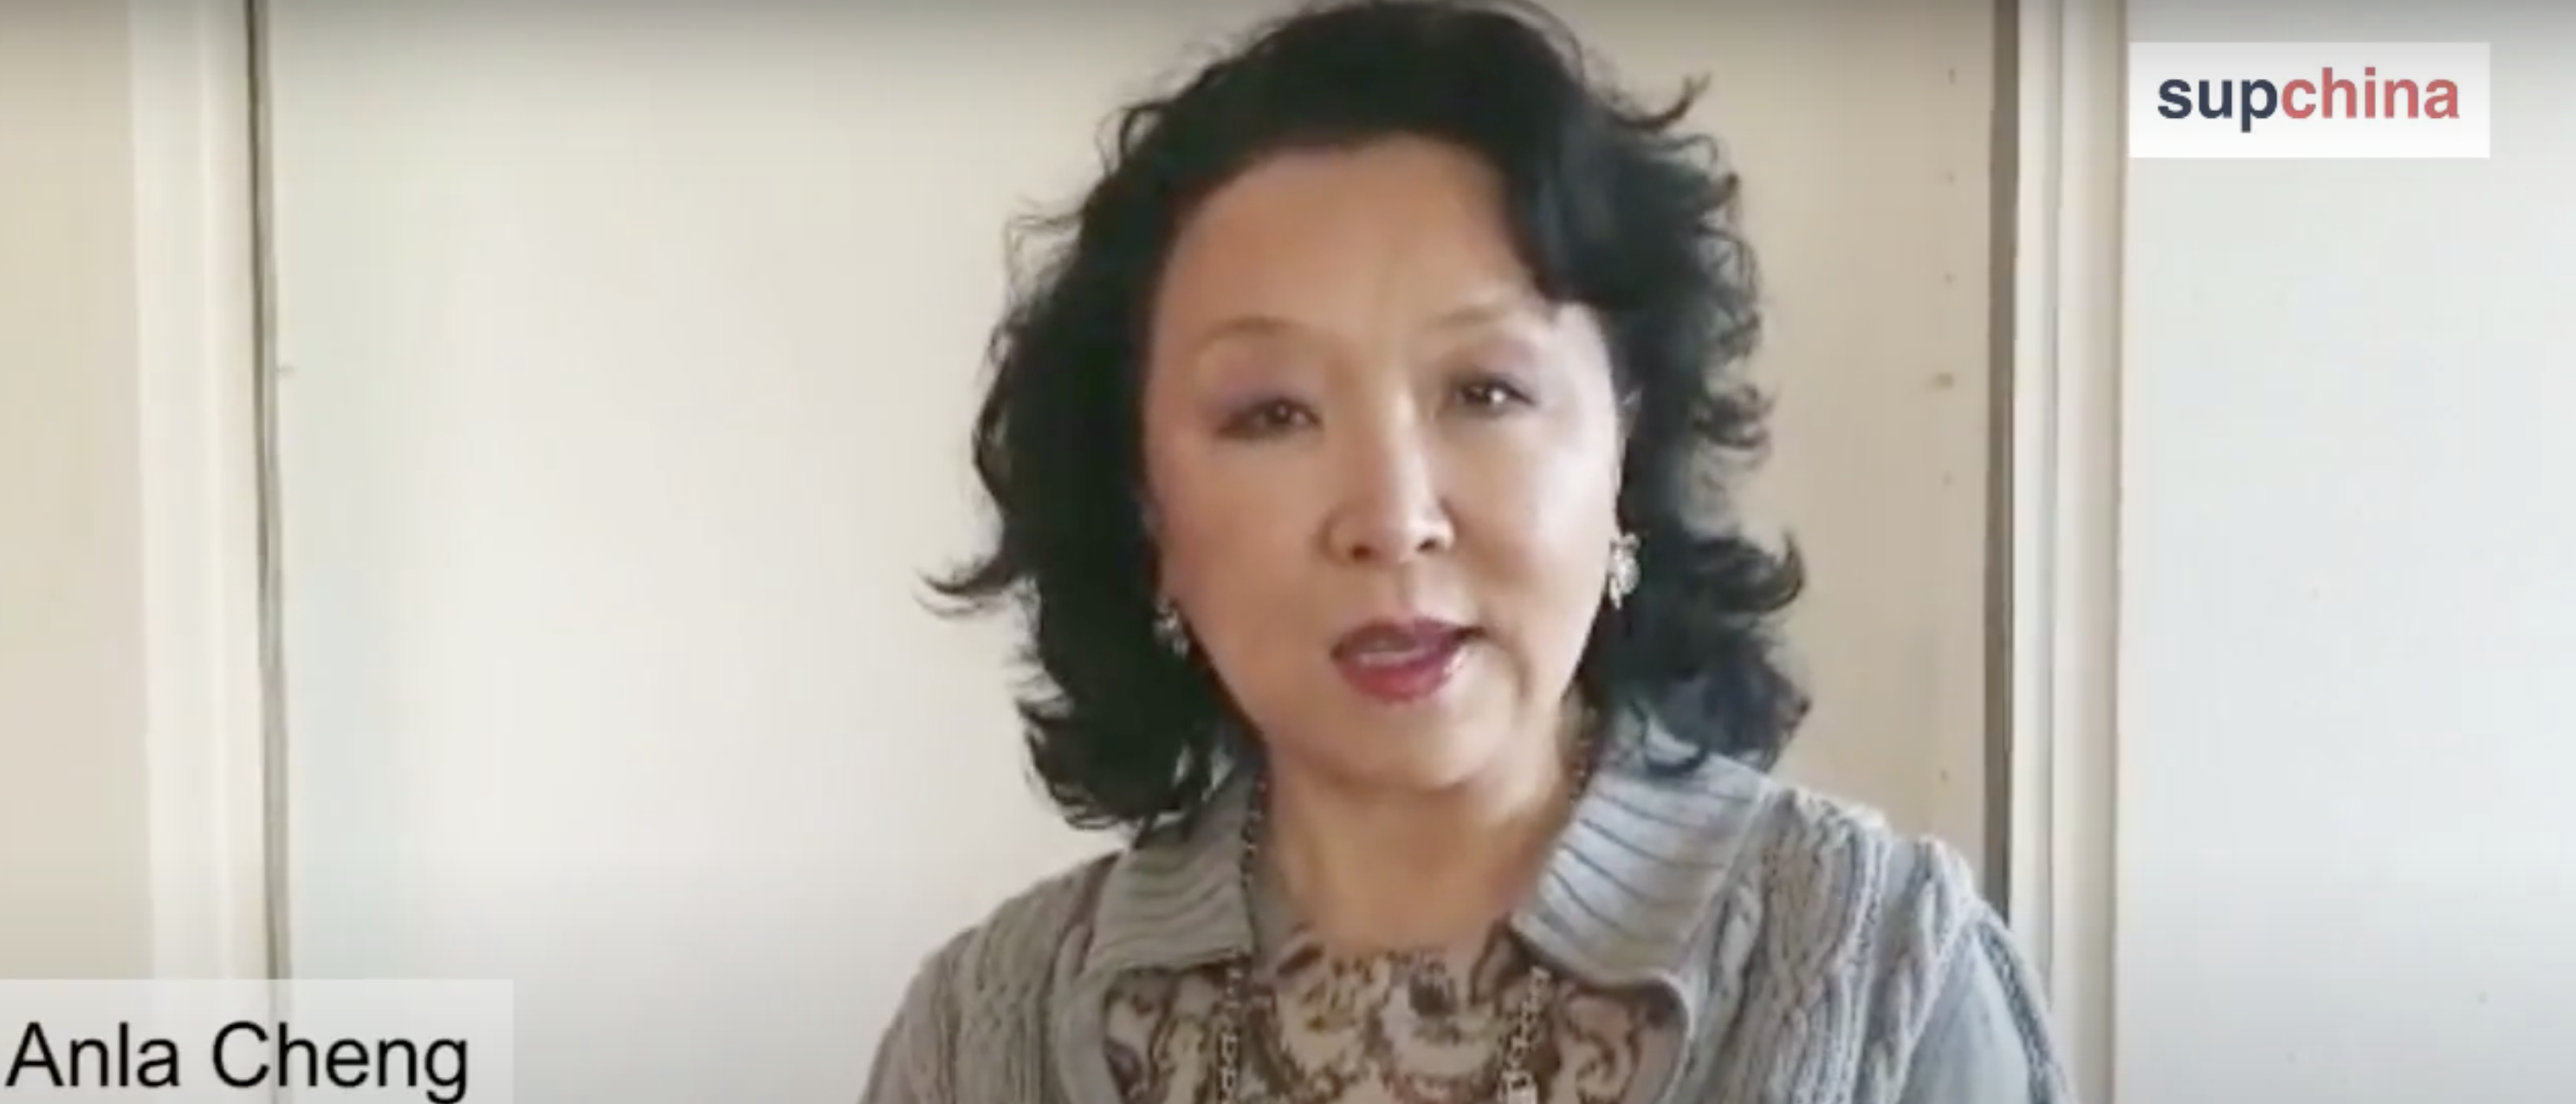 Anla Cheng is the founder of The China Project and is also a member of the Committee of 100. [ScreenShot/YouTube/TheChinaProject]